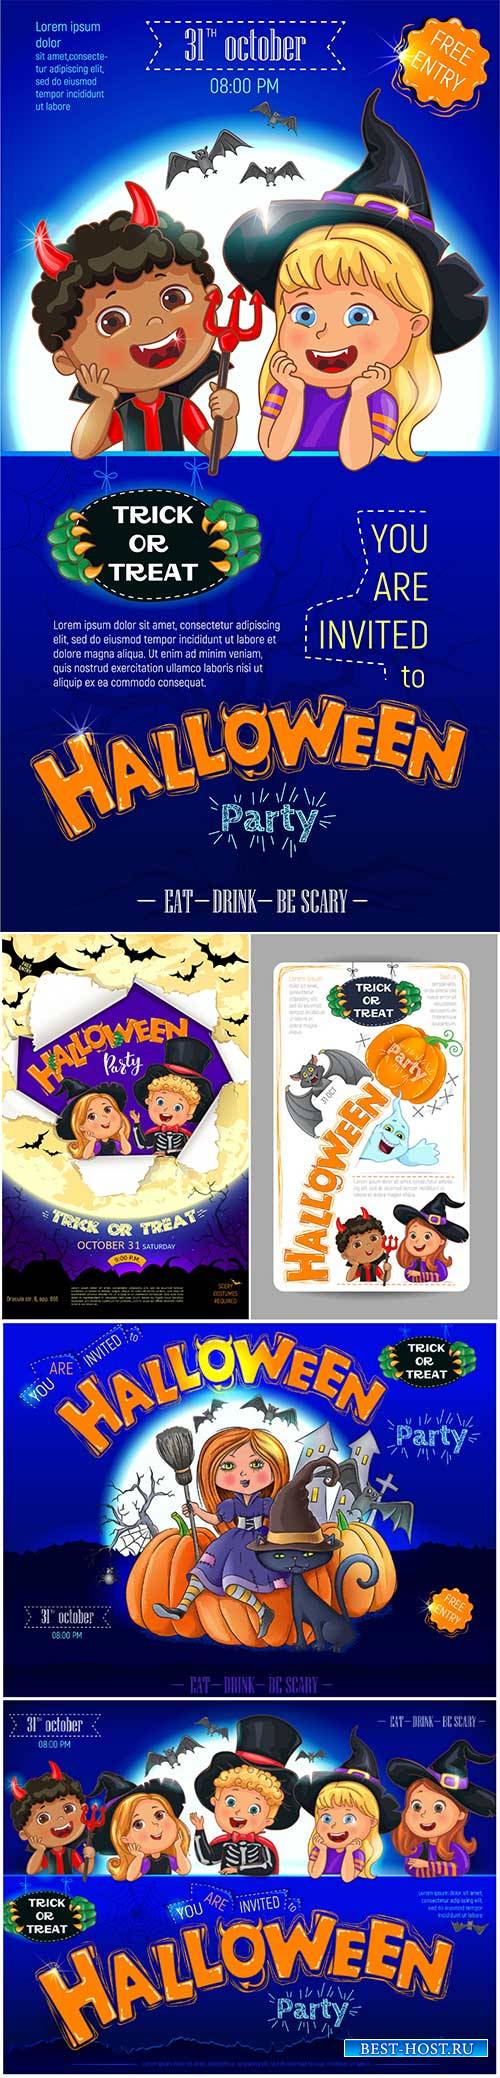 Halloween party design with cute kids invitation flyer